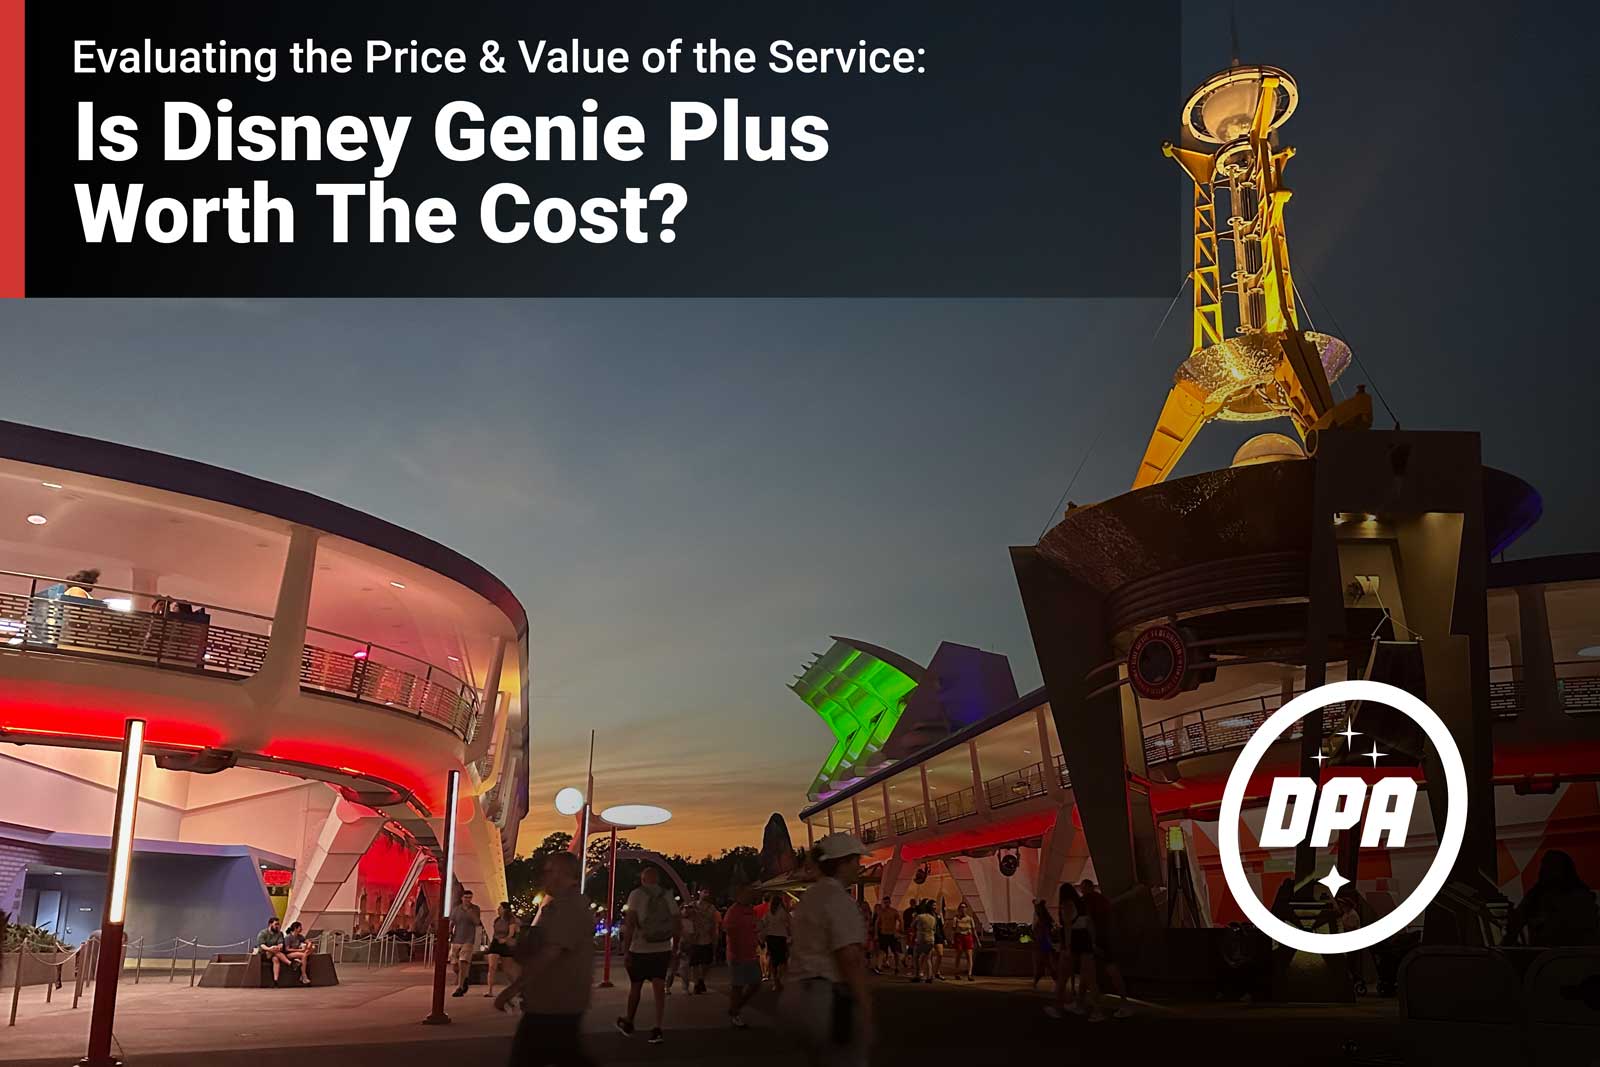 Is Disney Genie+ Worth the cost? Evaluating the Value of the Service